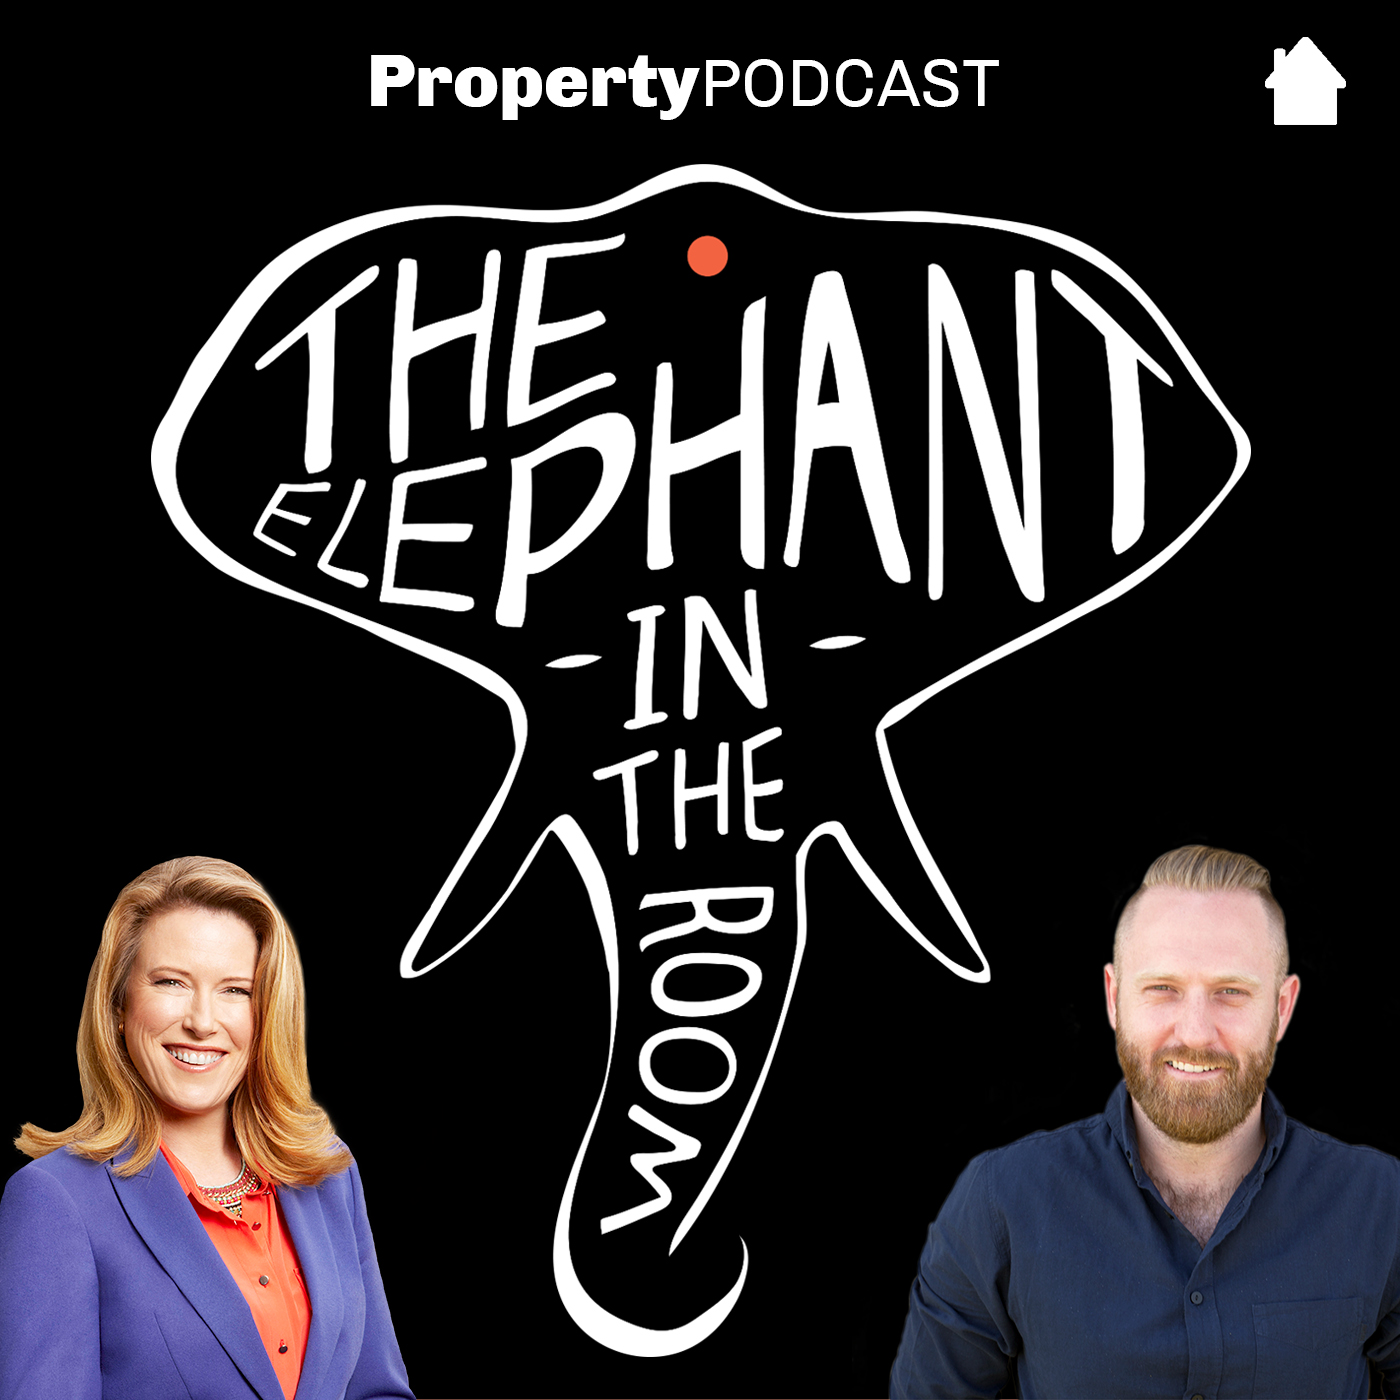 Ep 60 - Mike Mortlock | Are property investors paying more tax than they need to? Insights from Geared for Growth